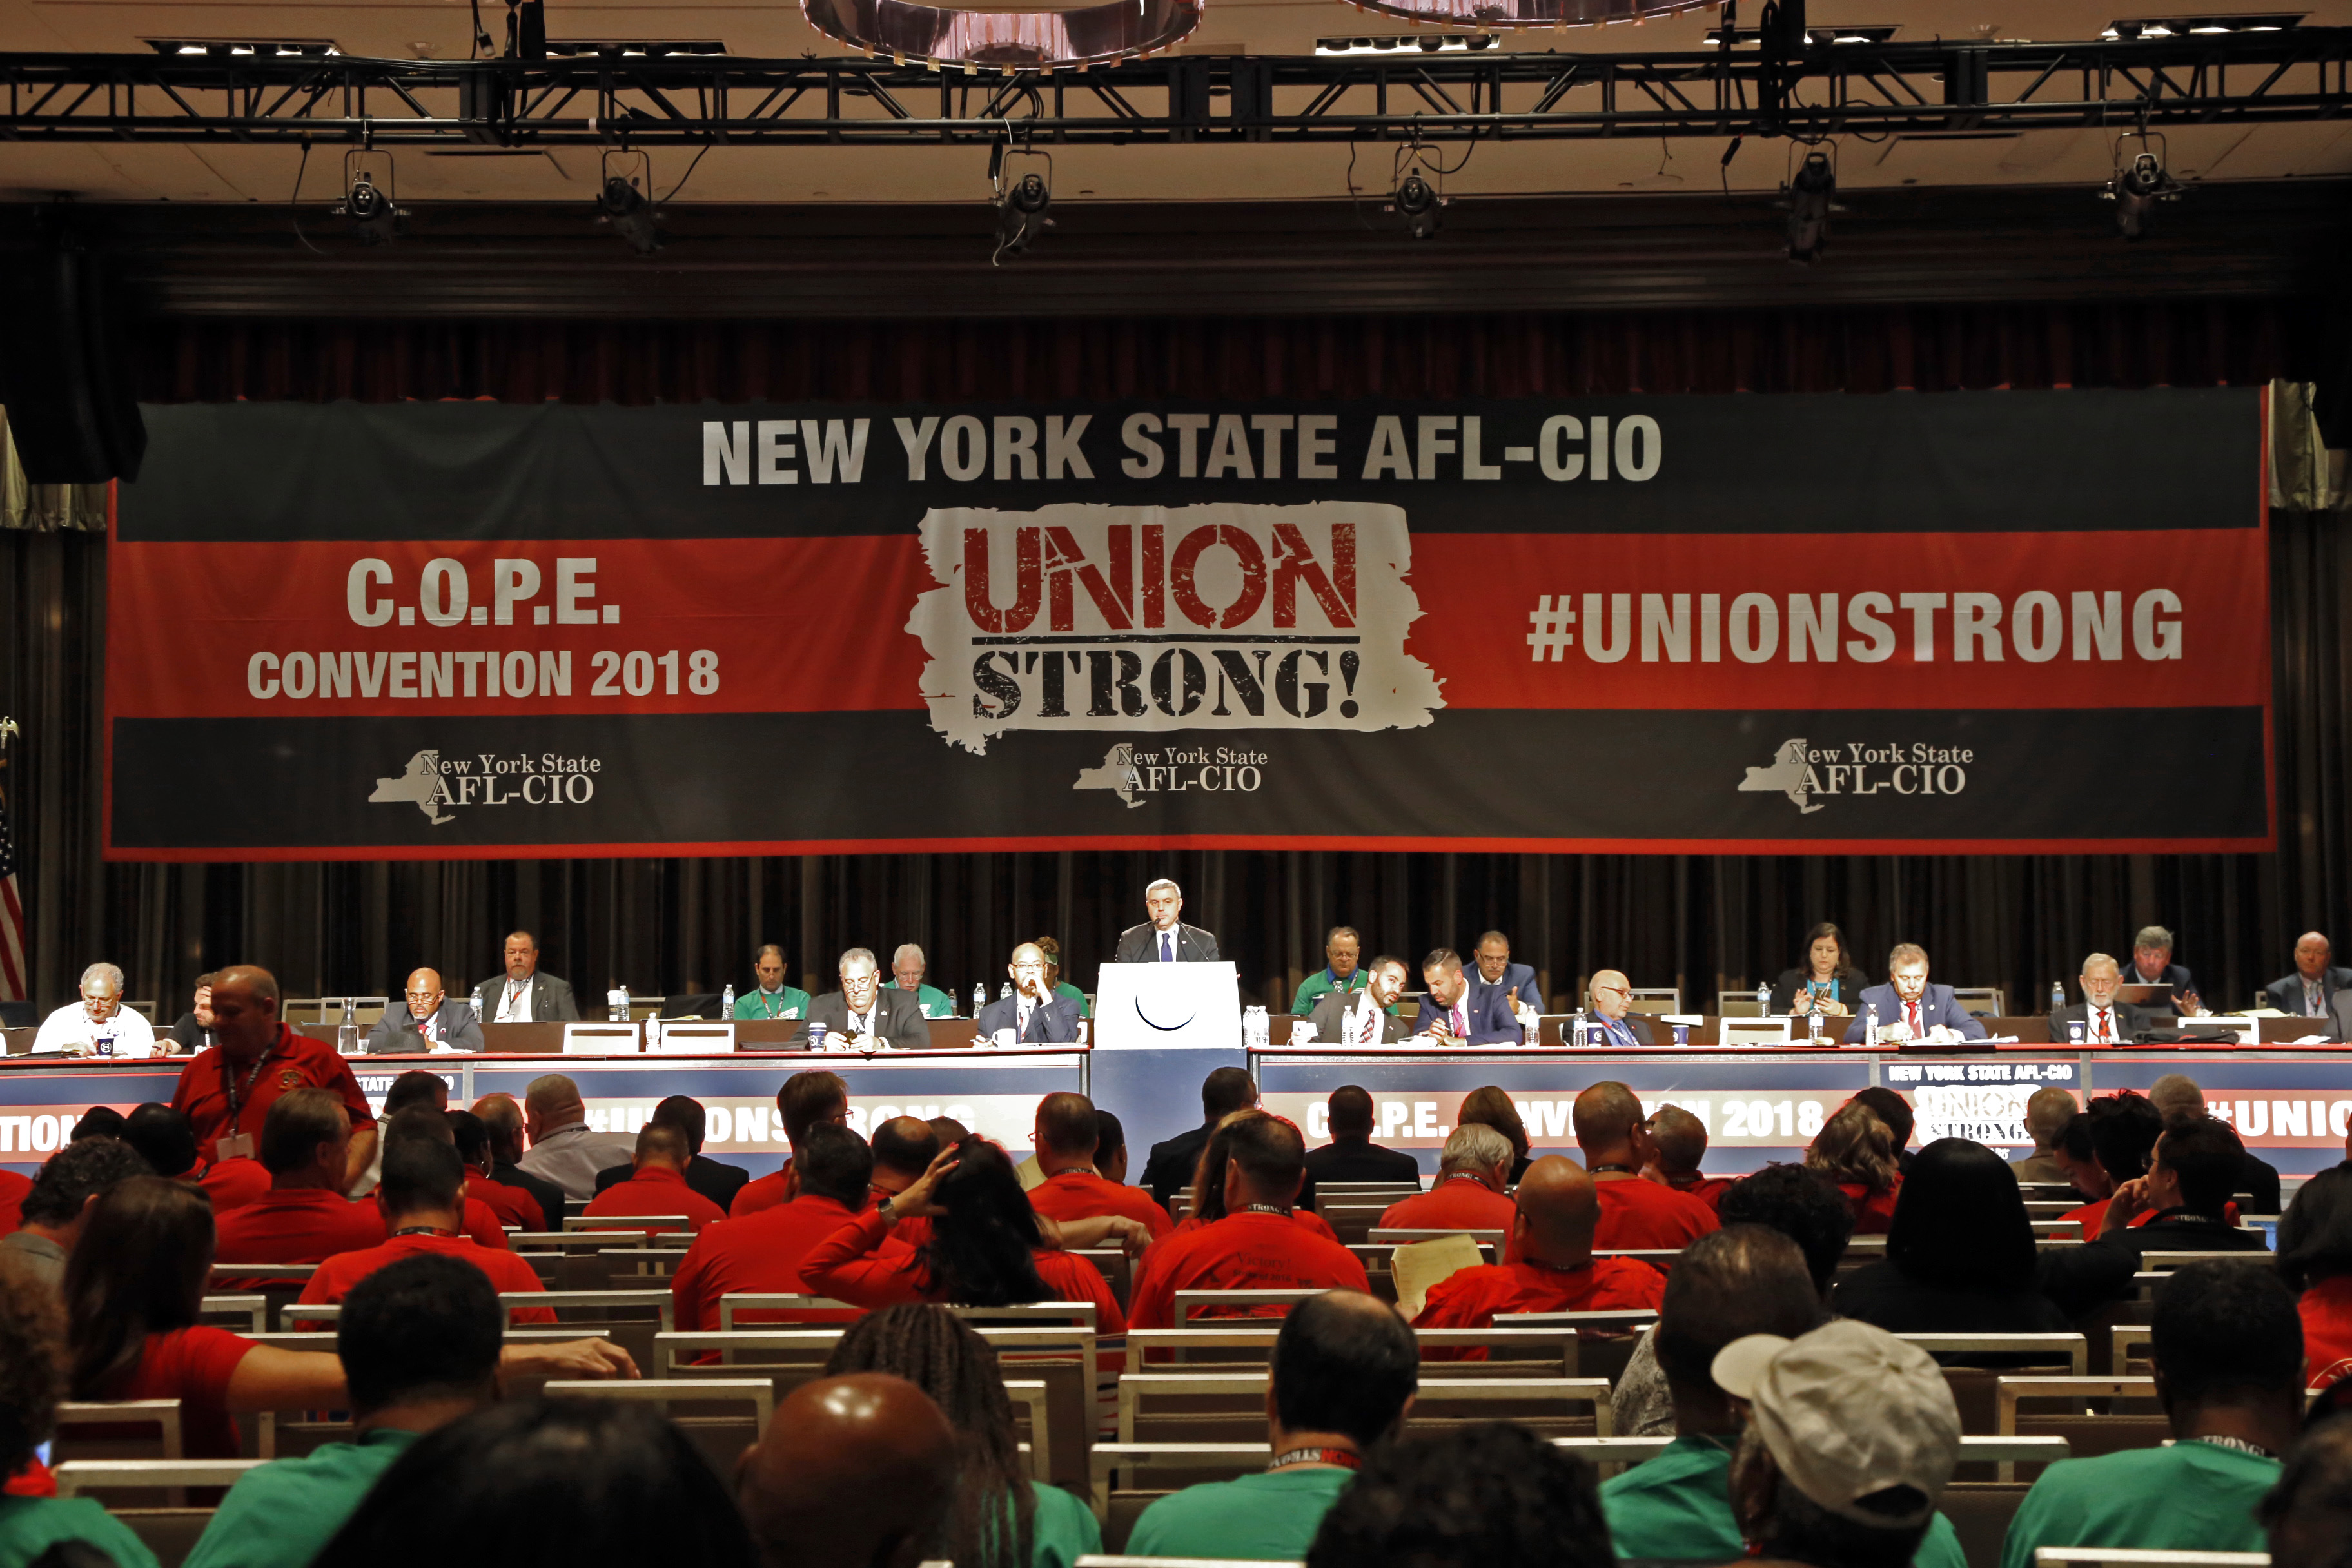 Photo of 2018 NYS AFL-CIO COPE Convention stage and audience